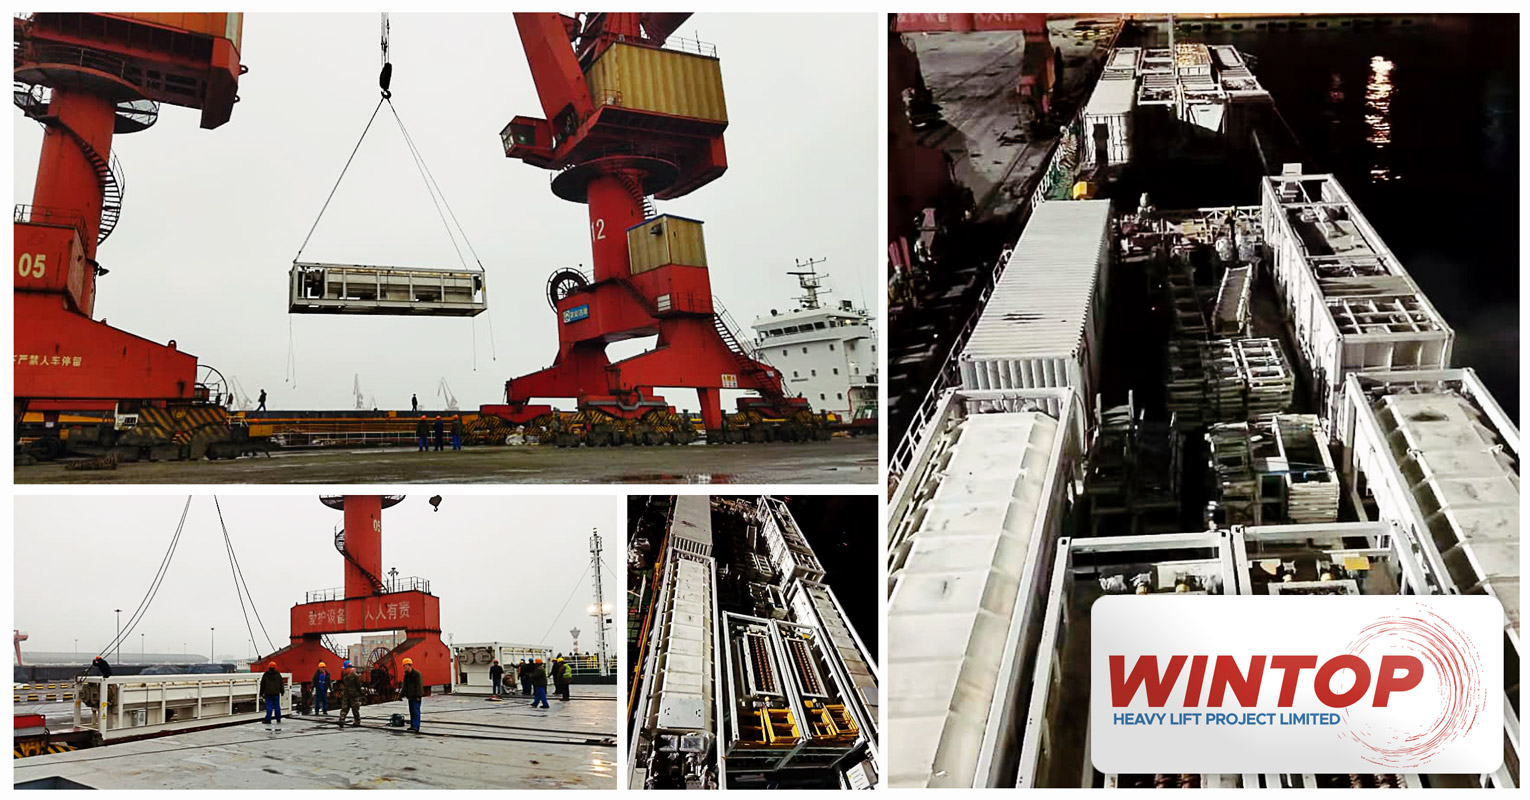 Soil Purification Equipment Carried by Wintop Heavy Lift Successfully Shipped